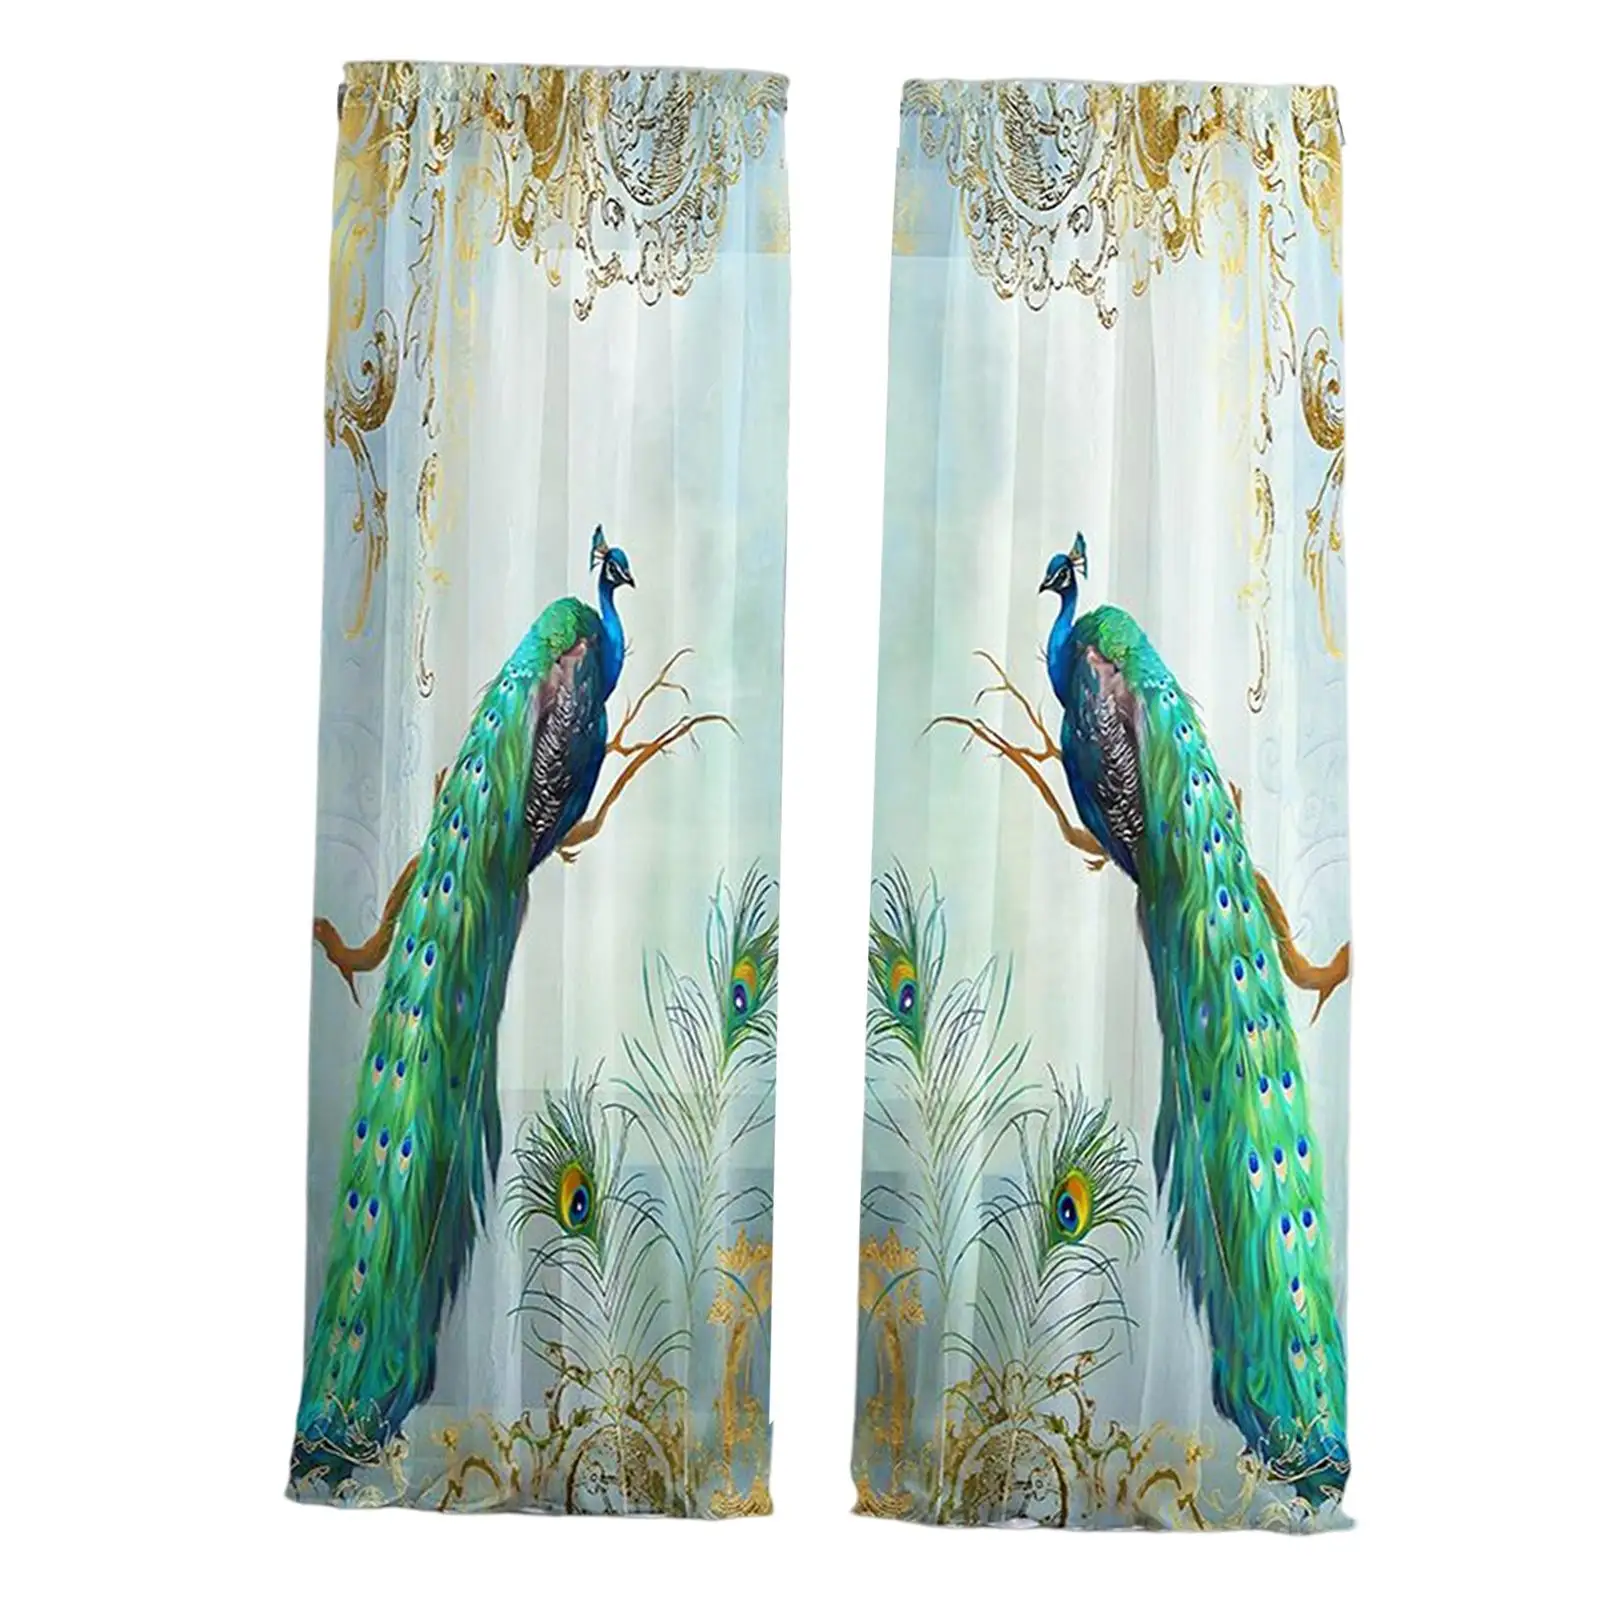 Peacock Window Curtains Privacy Drapes Panels Window Treatments Luxurious Light Filtering Window Curtain for Bathroom Doorway